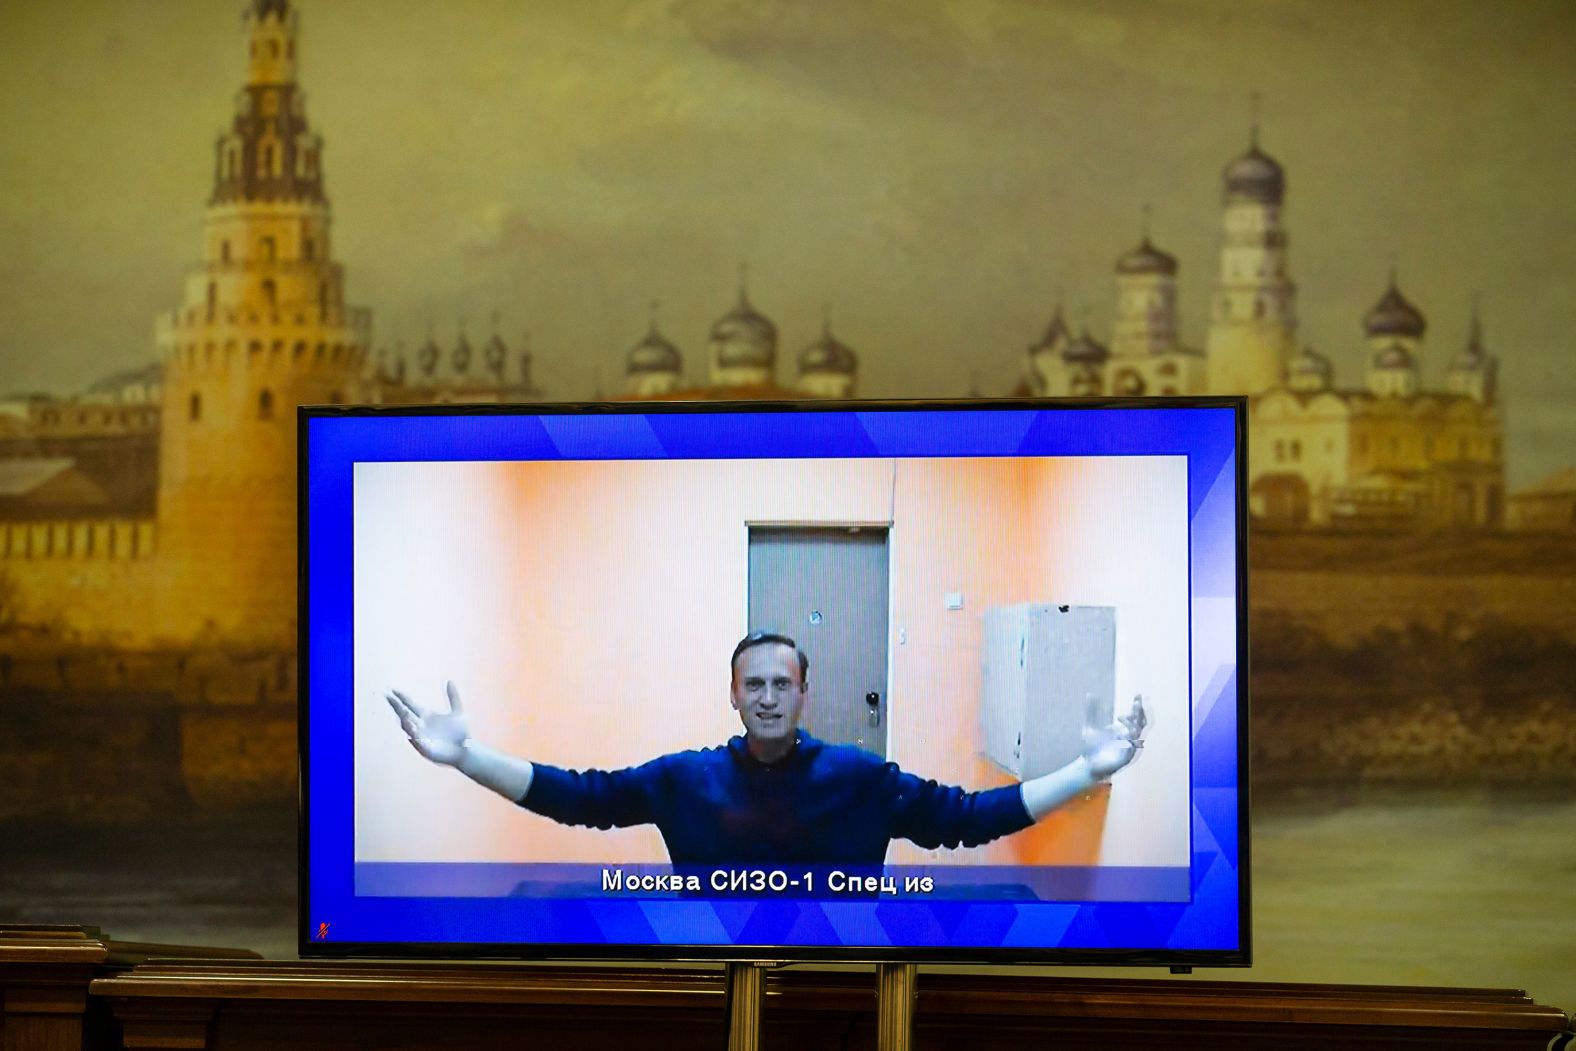 Navalny appears on a TV screen during a court hearing of his appeal in Moscow in January 2021. A Moscow court sentenced Navalny to prison for more than two and a half years for violating probation terms while he was in Germany.